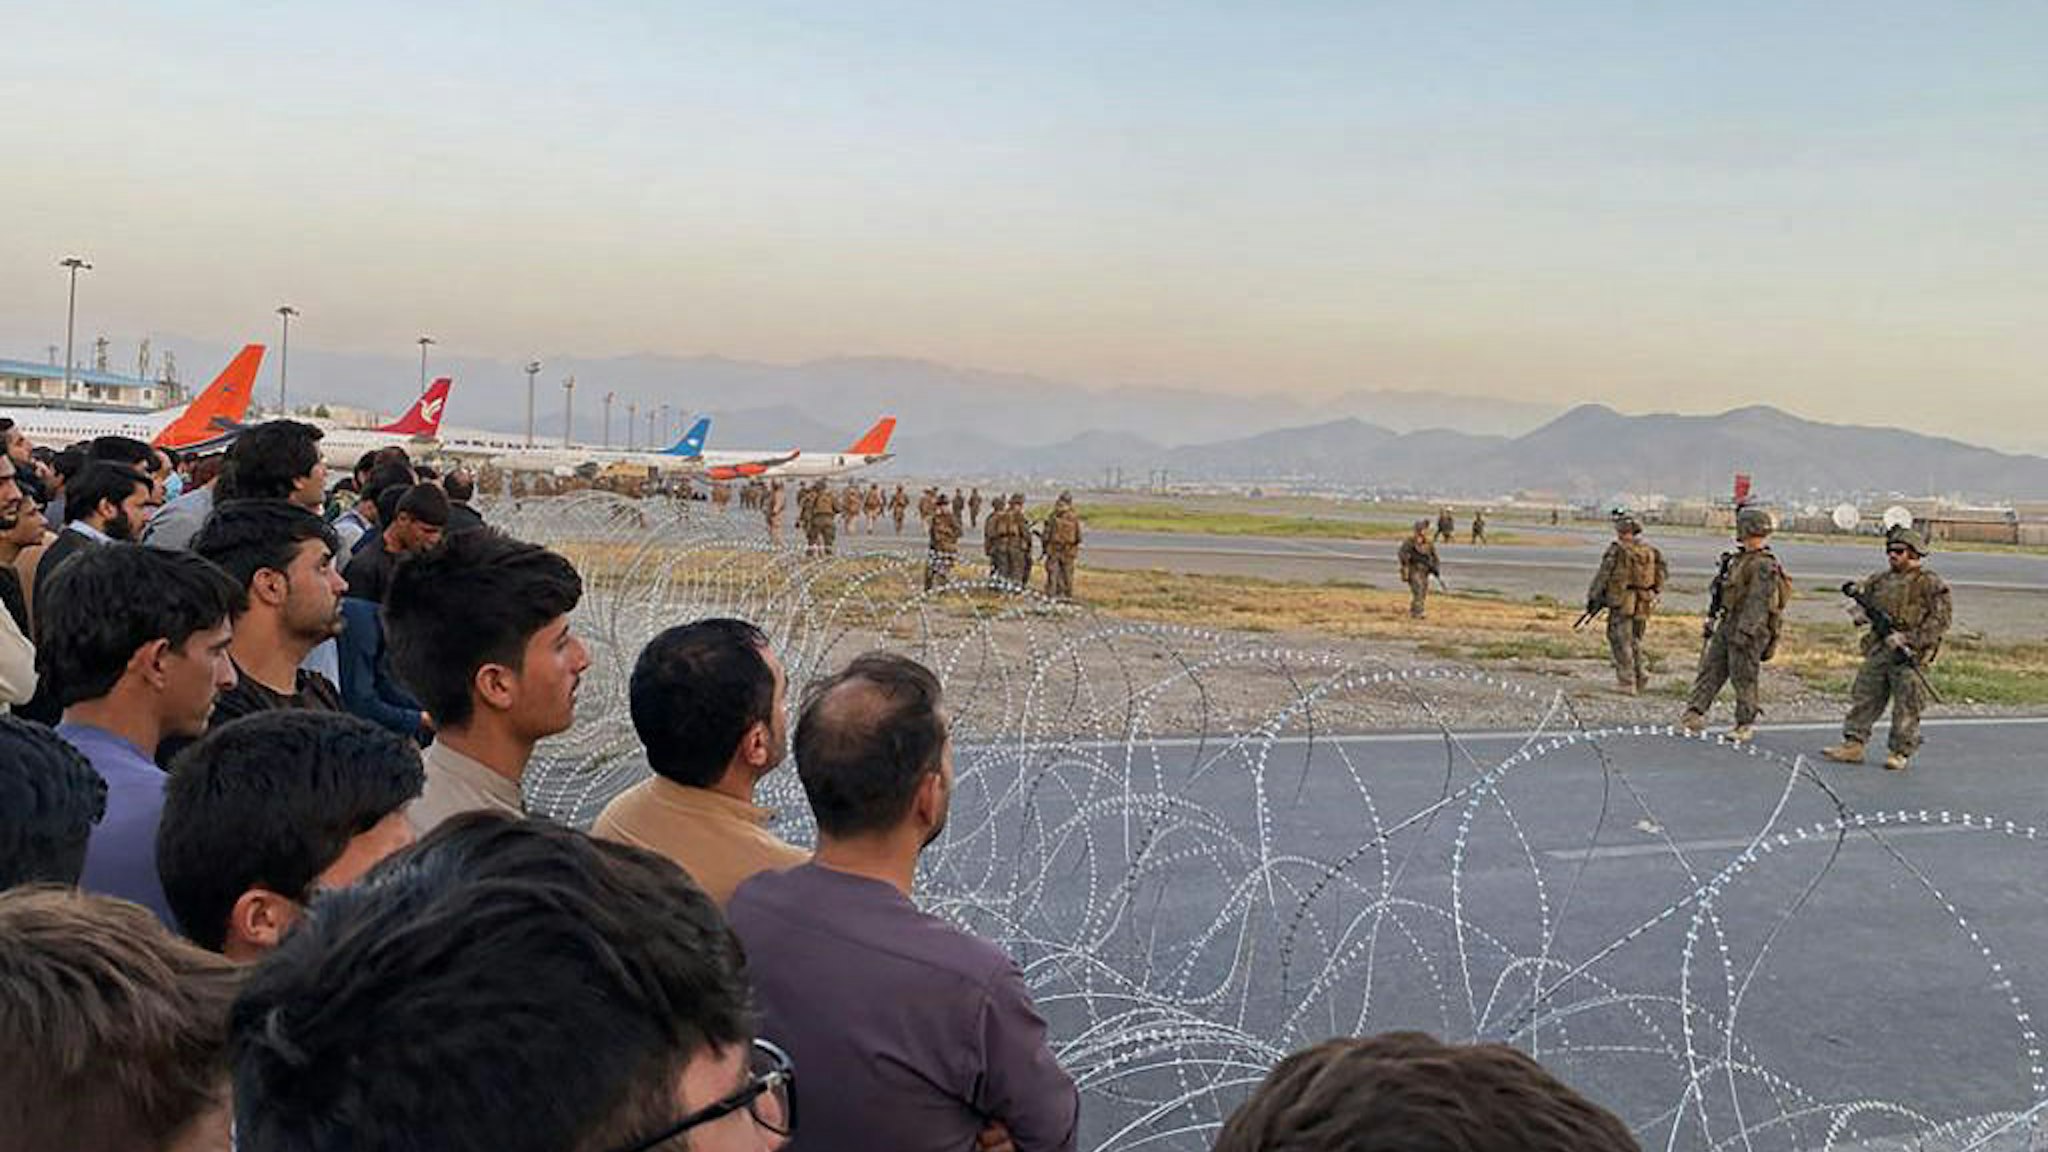 TOPSHOT - Afghans (L) crowd at the airport as US soldiers stand guard in Kabul on August 16, 2021. (Photo by Shakib Rahmani / AFP) (Photo by SHAKIB RAHMANI/AFP via Getty Images)